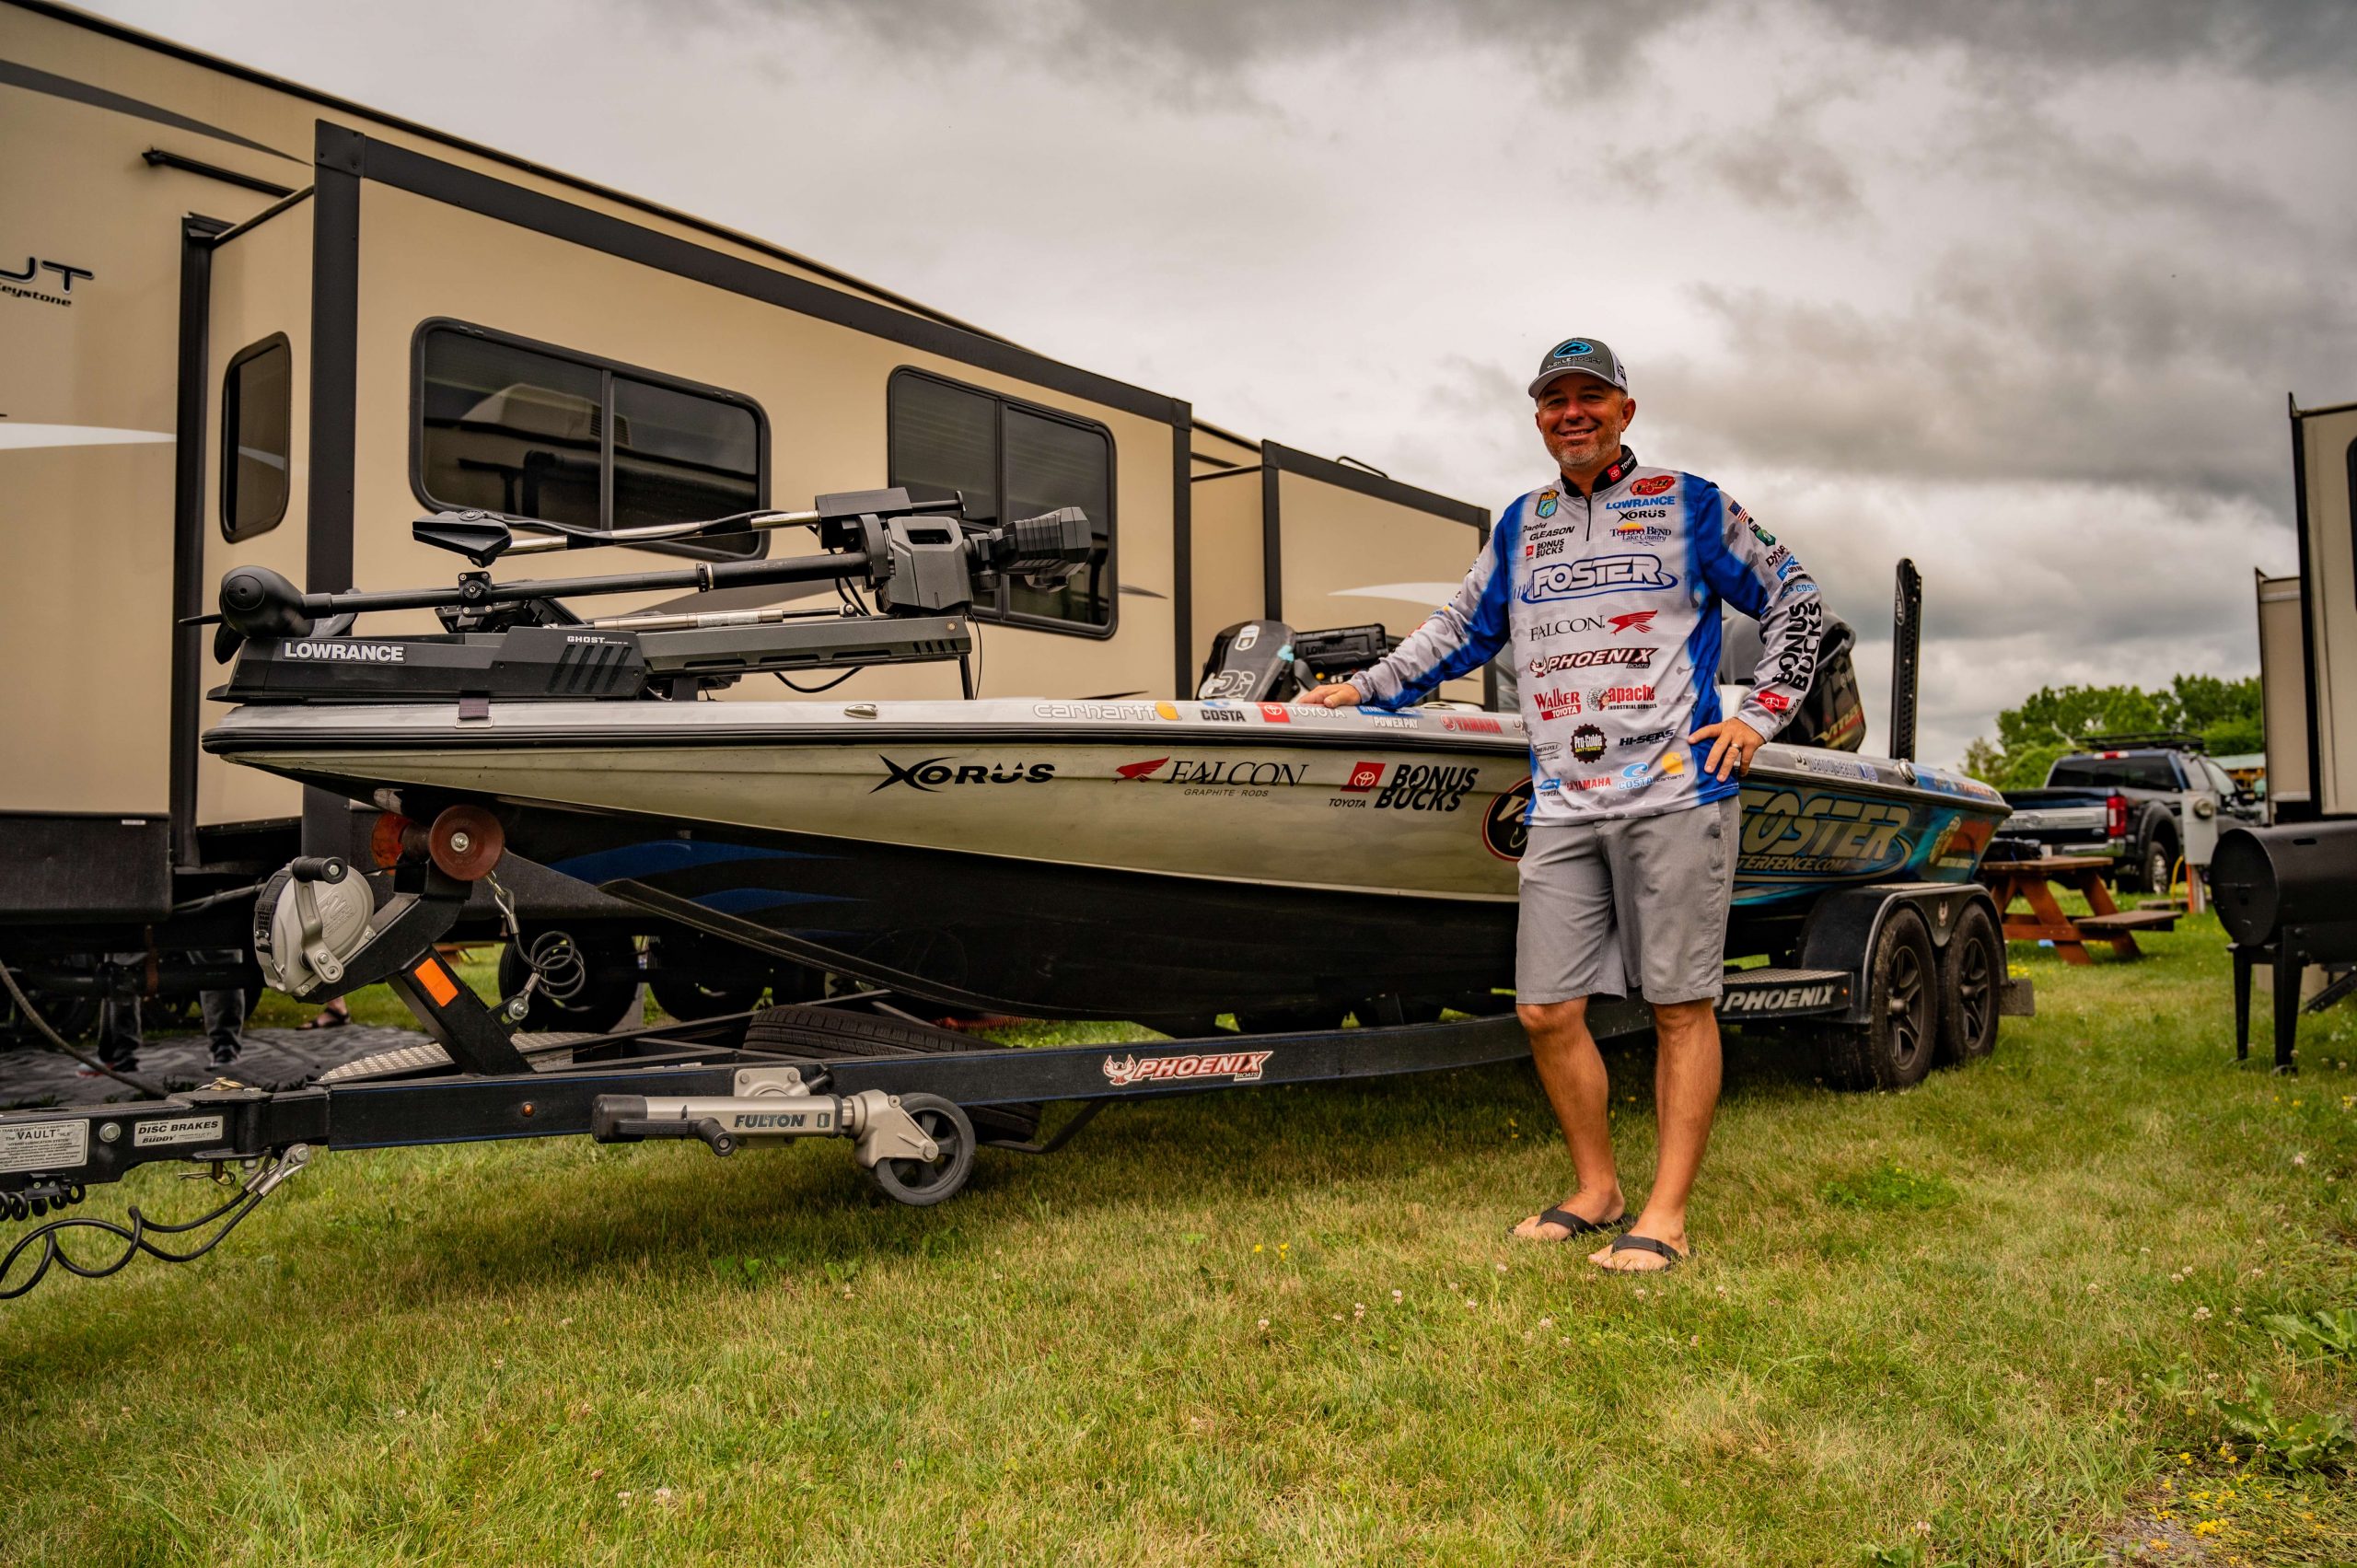 Bassmaster Elite Series angler Darold Gleason not only crosses the country on the Bassmaster Elite Series, but he also runs a premier guide service on his home lake of Toledo Bend. Winner of the 2019 Bassmaster Central Open on Toledo Bend, Gleason knows the lake as well as anyone. We asked him to share his top five techniques for a successful day on the famous fishery.